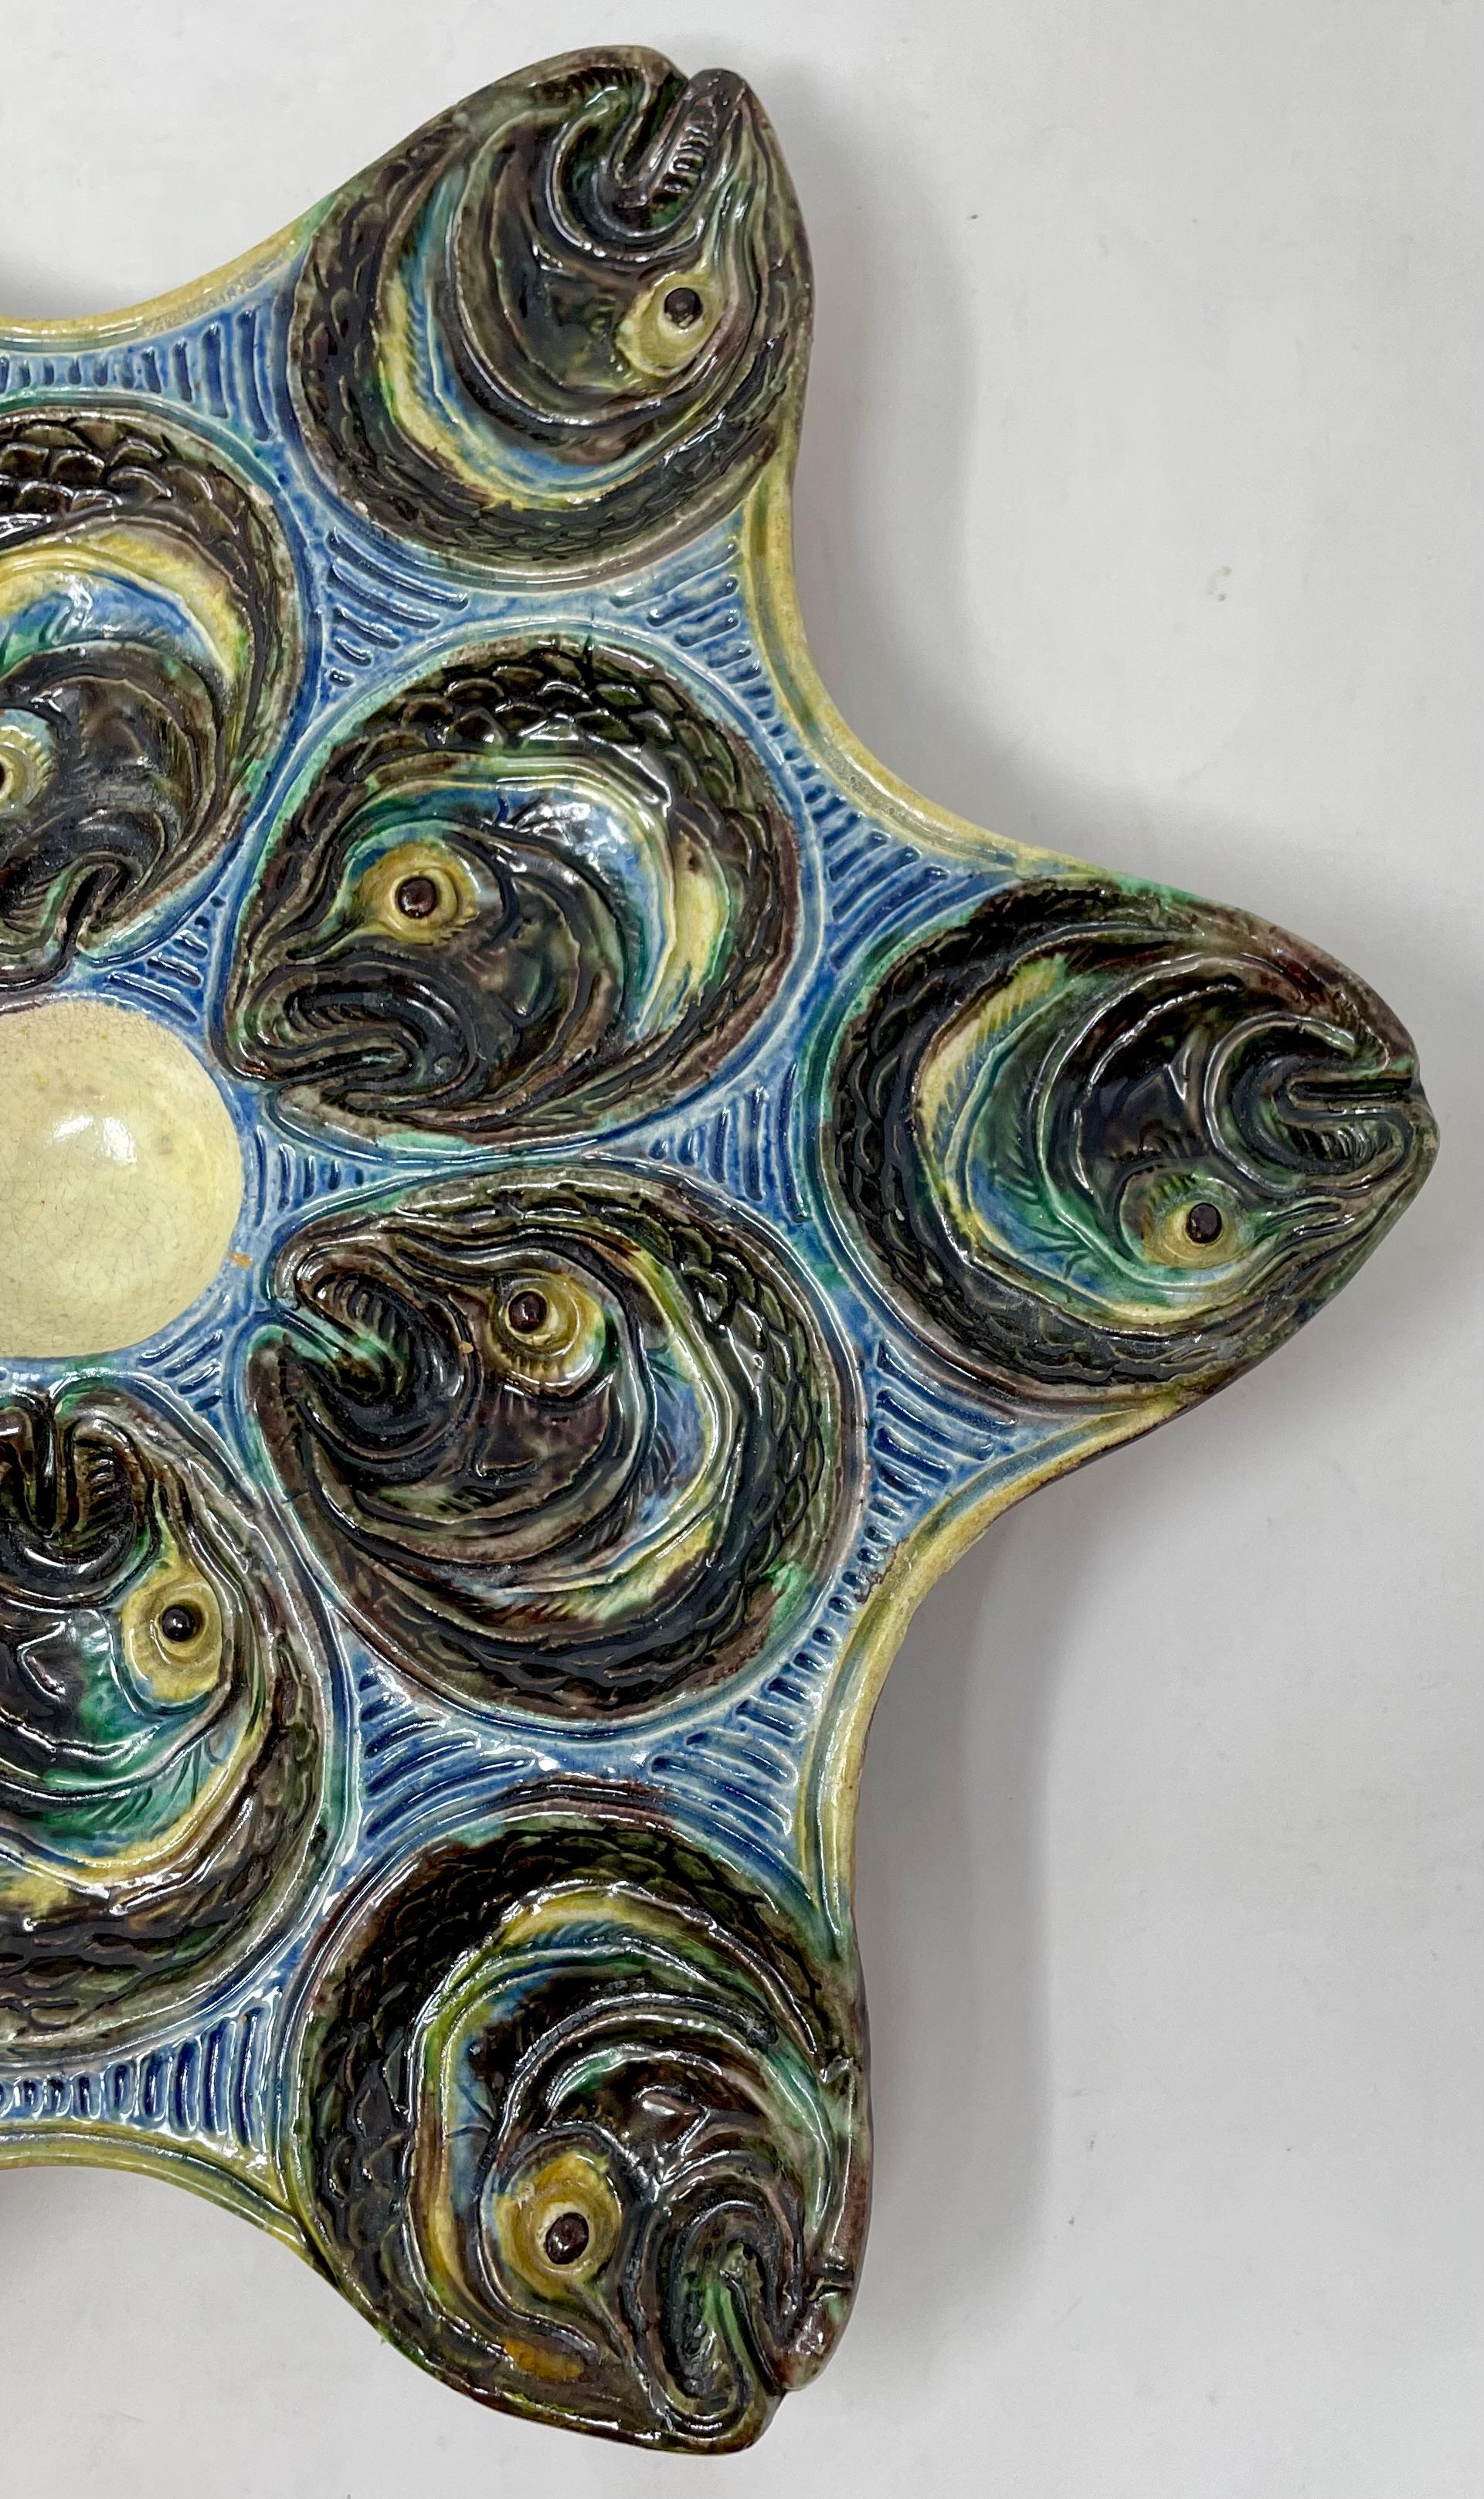 Antique French faience Barbotine Palissy Ware Majolica porcelain fish-head oyster plate, circa 1890.